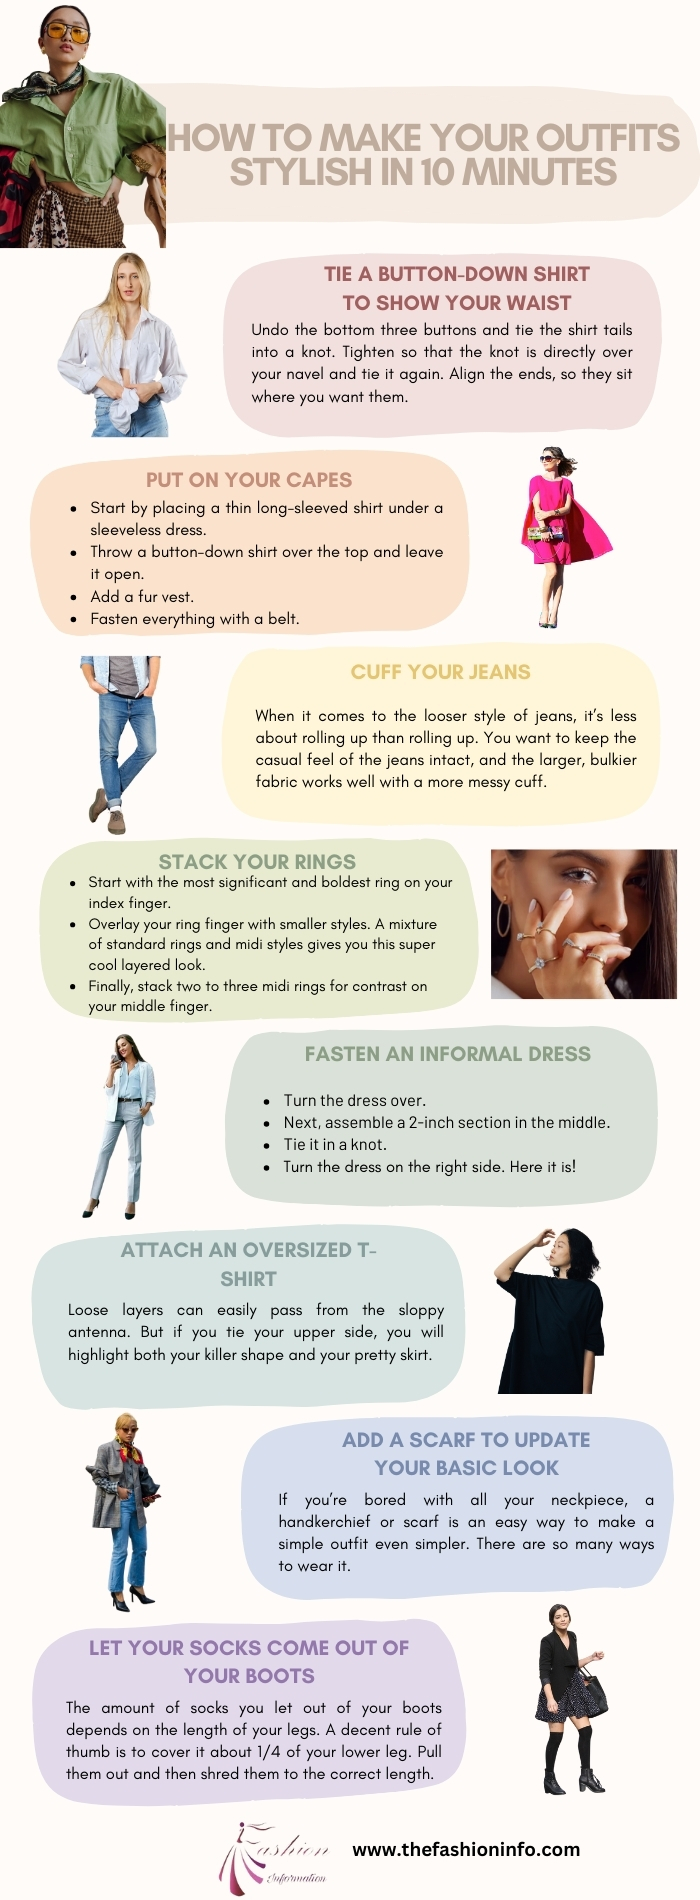 How to make your outfits stylish in 10 minutes